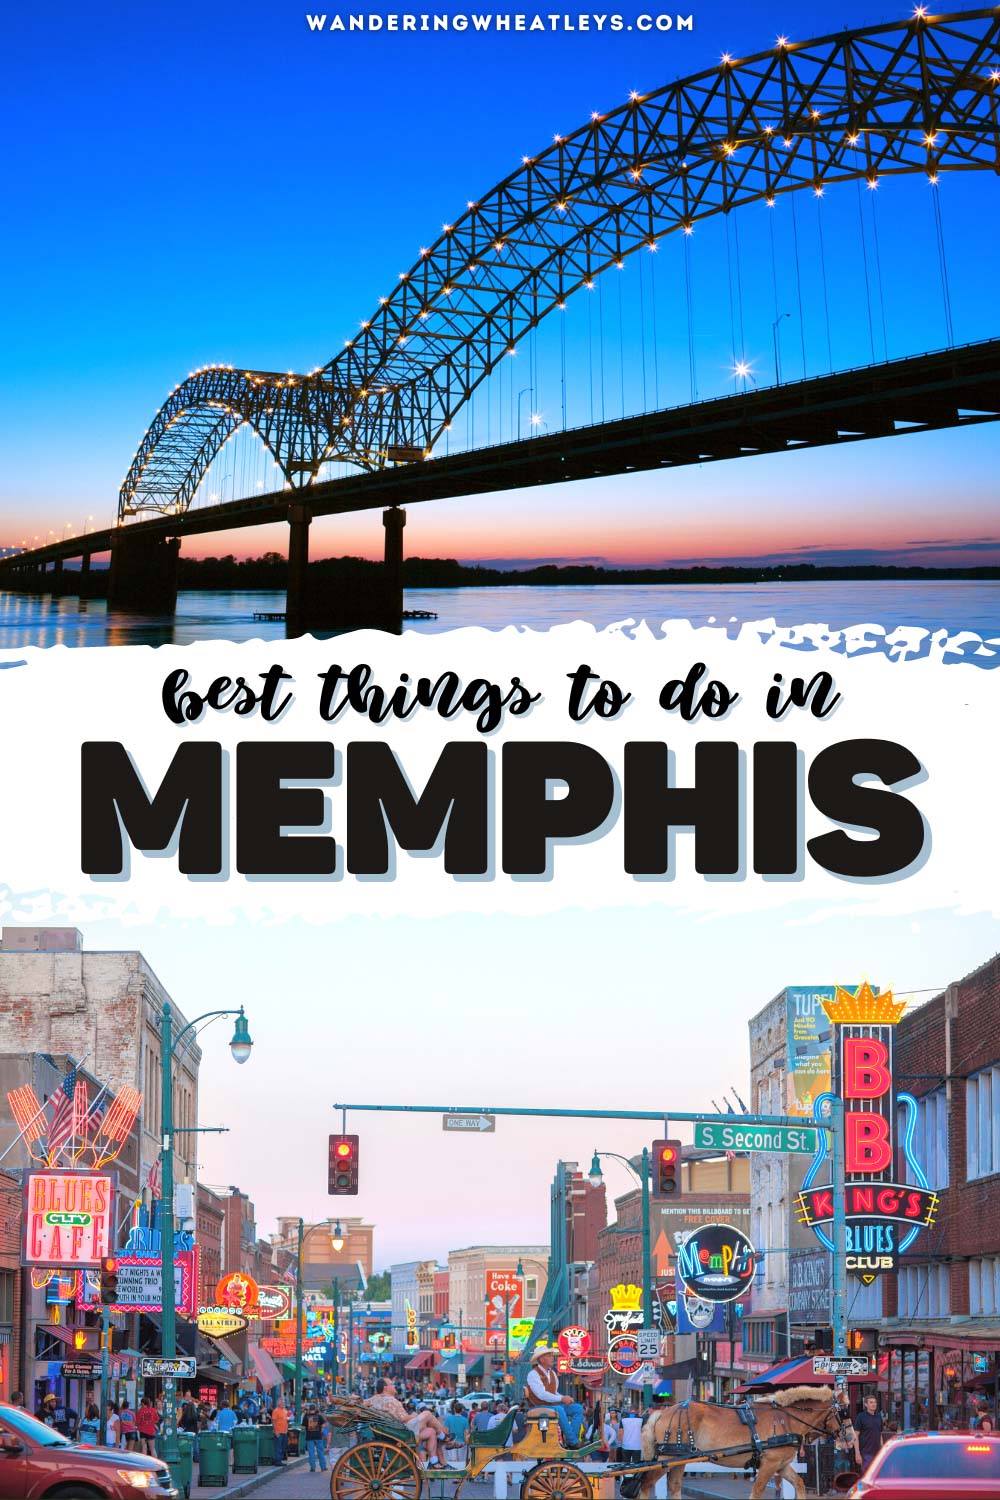 The Best Things to do in Memphis, Tennessee